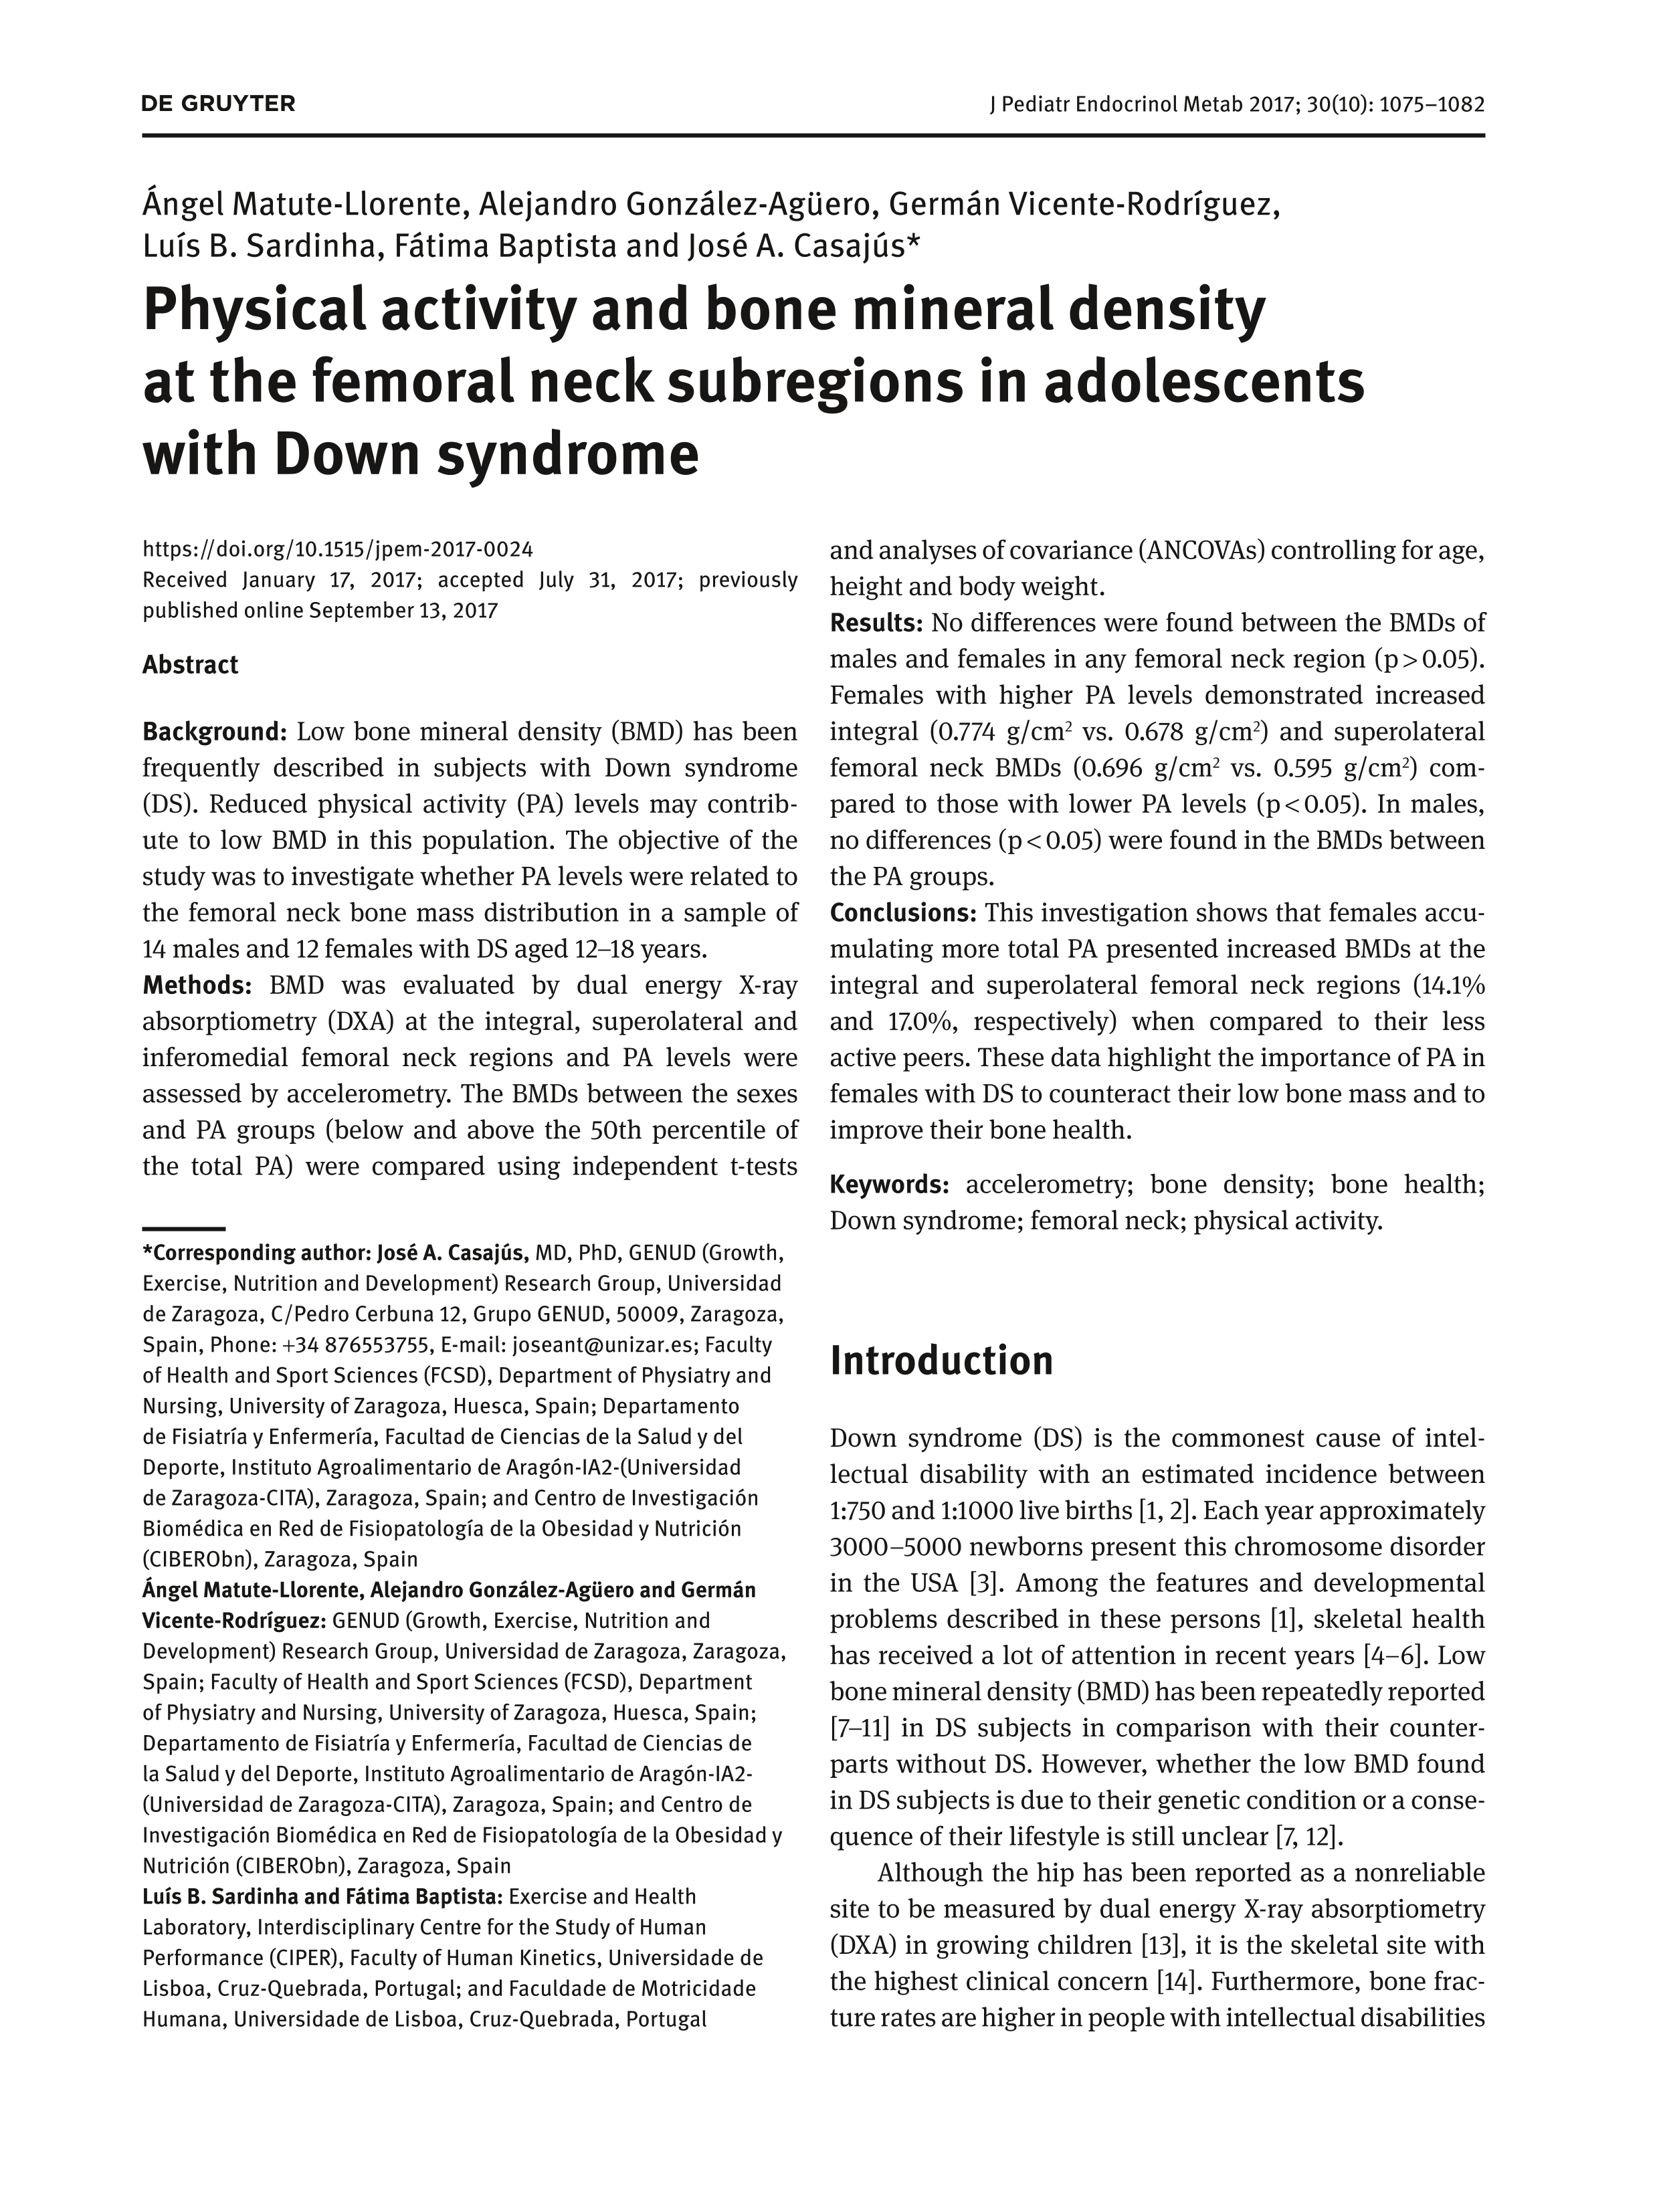 Physical activity and bone mineral density at the femoral neck subregions in adolescents with Down syndrome